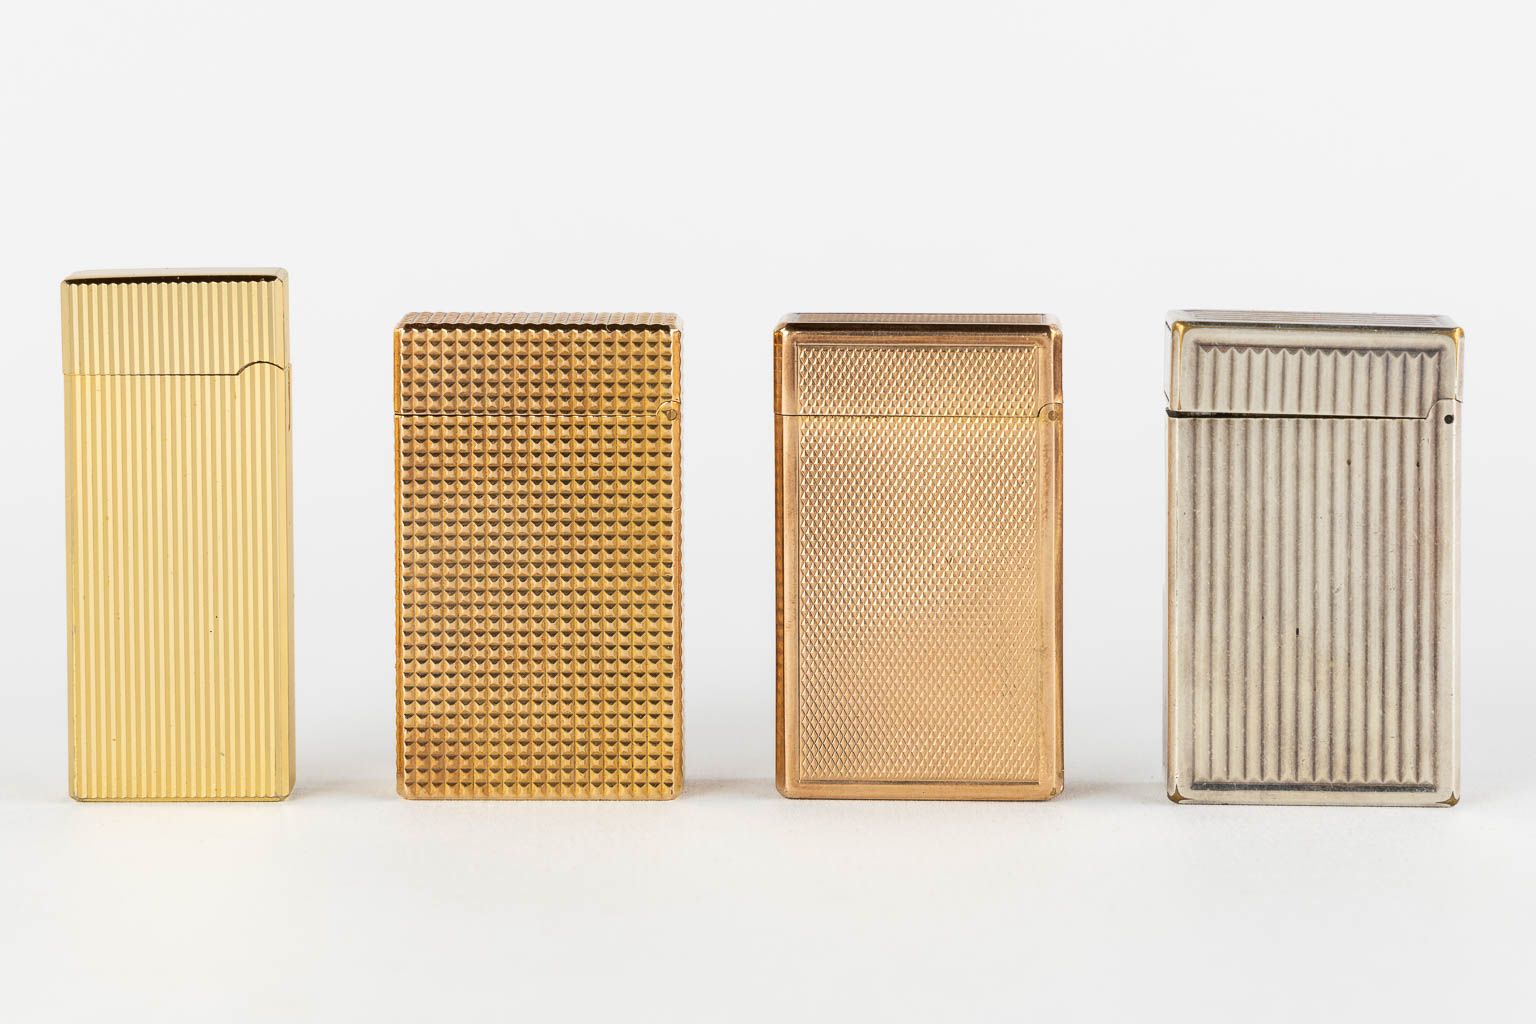 ST. Dupont, Three gold and silver plated lighters, added a Givency lighter. (L:1 x W:3,5 x H:6 cm)